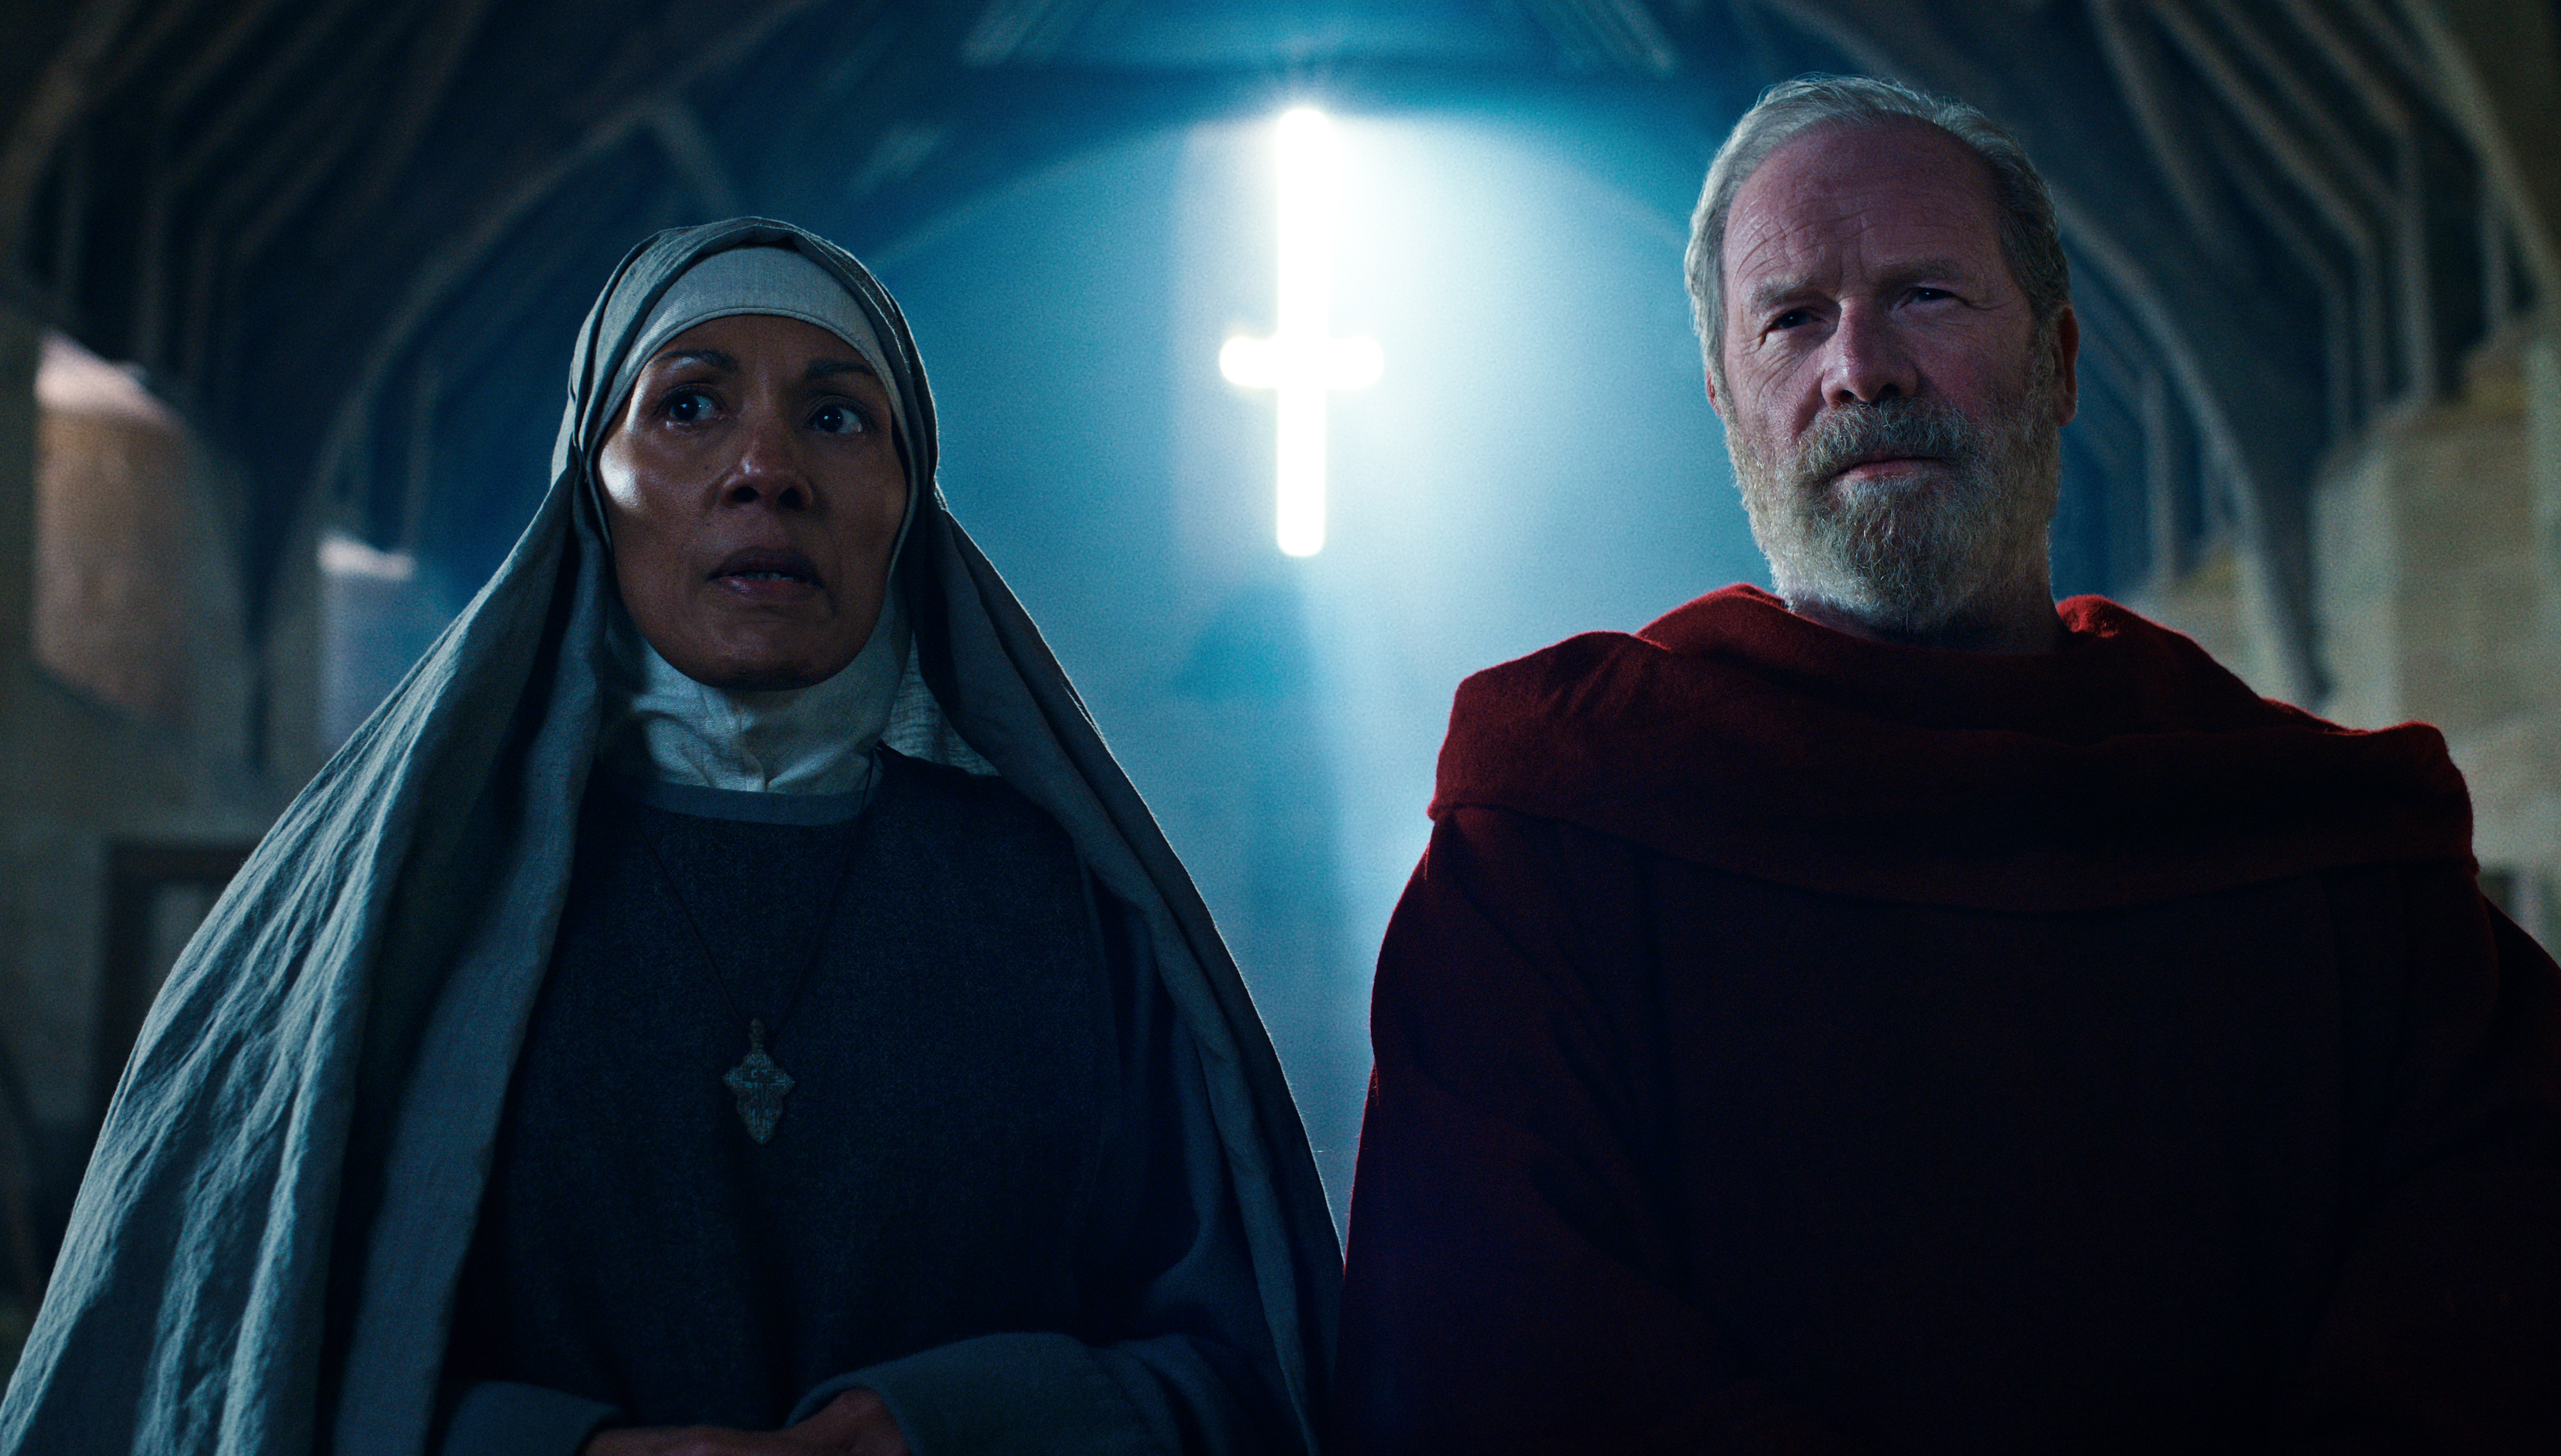 CAROLINE LEE JOHNSON as ABBESS NORA and PETER MULLAN as FATHER CARDEN